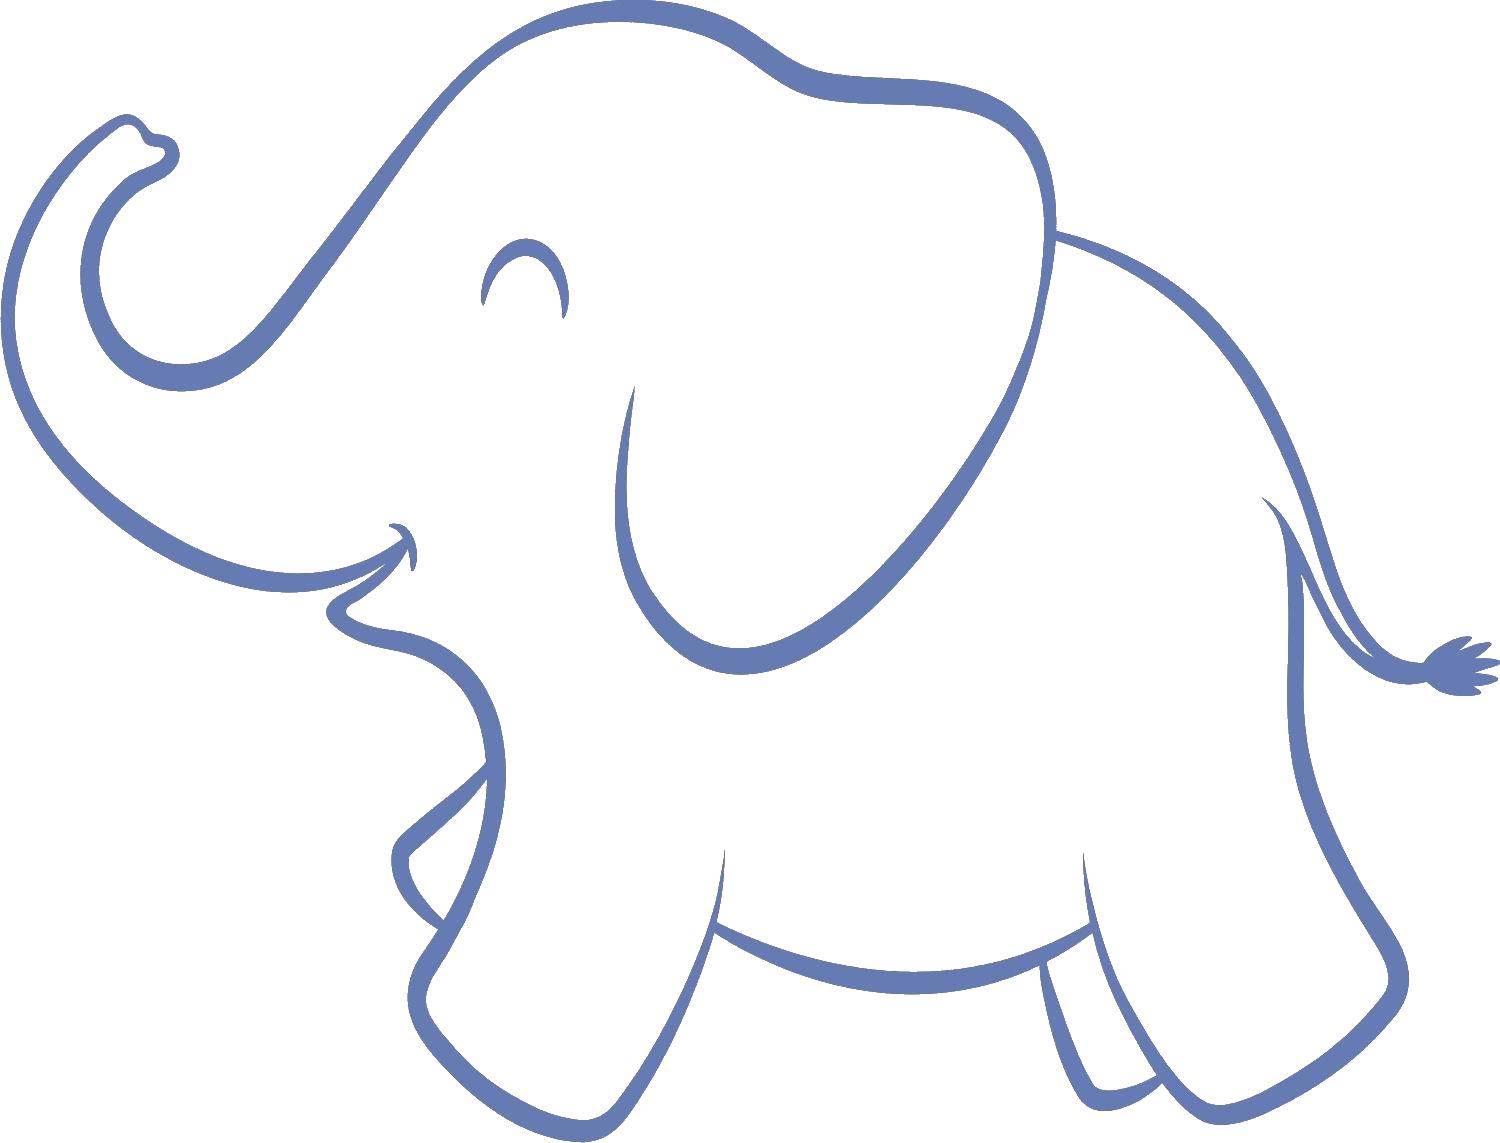 Coloring The outline of an elephant. Category the contours of the elephant to cut. Tags:  dissent, elephant, tusks, trunk.